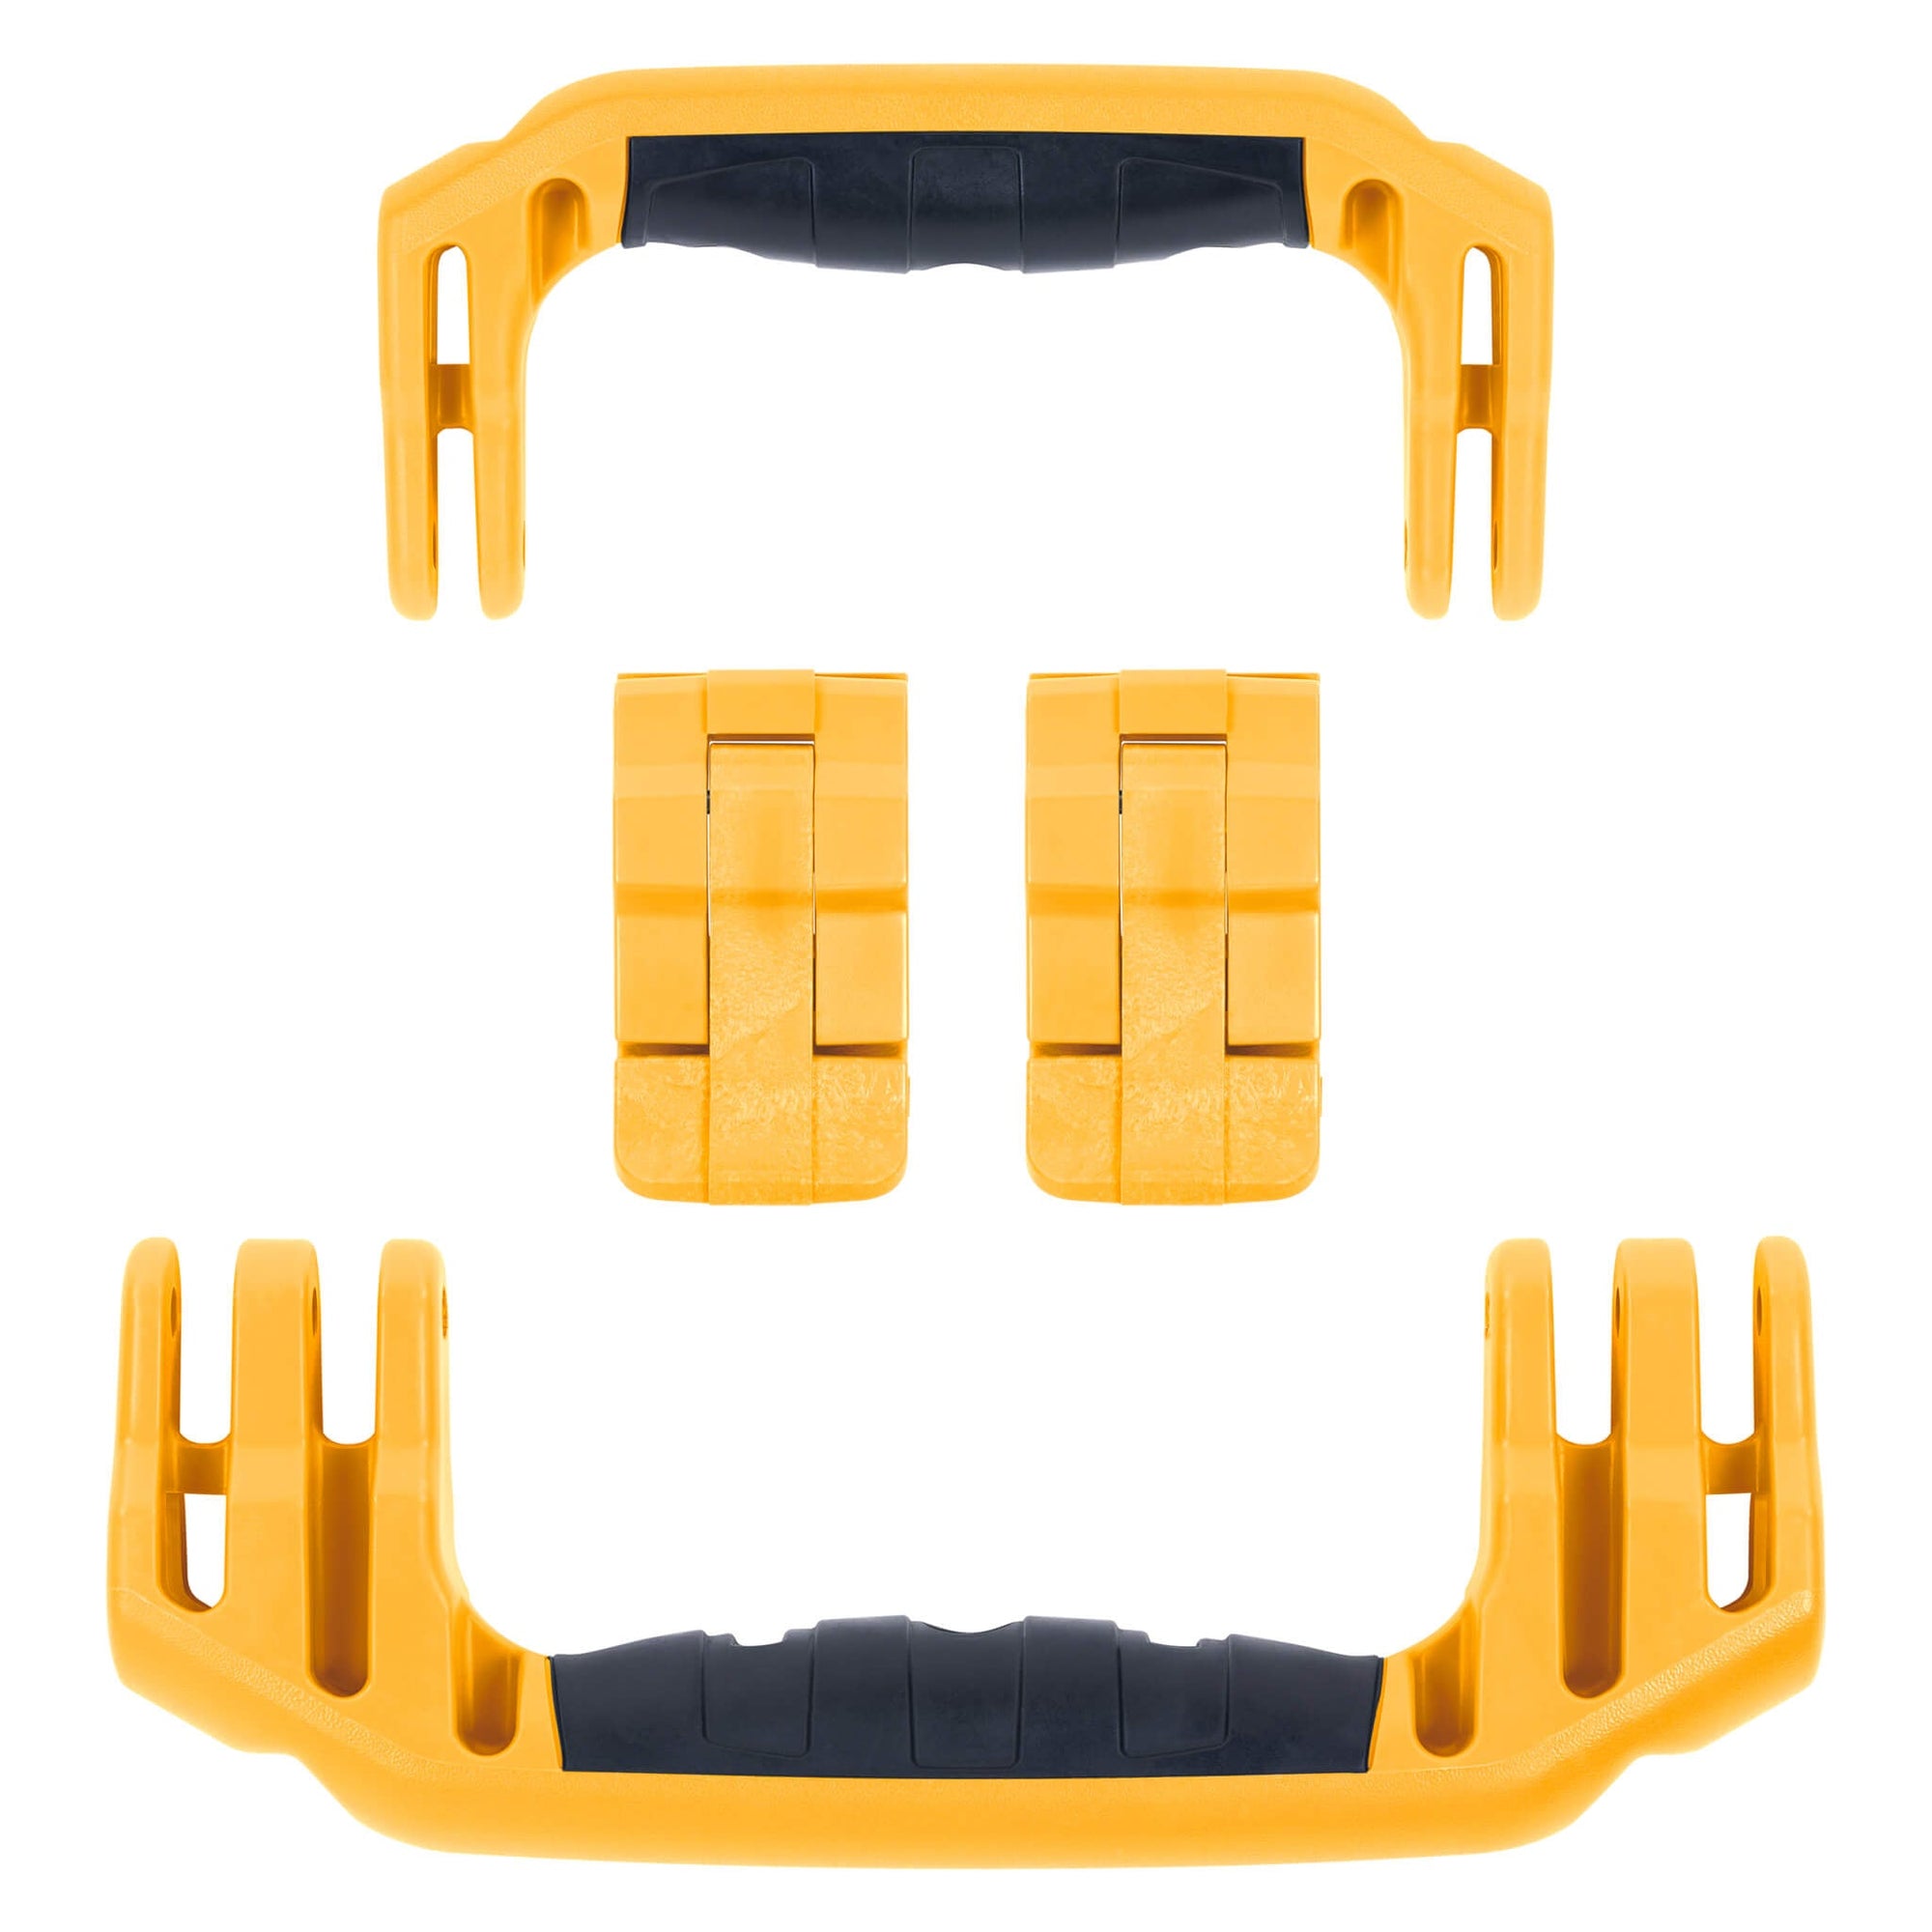 Pelican 1560 Replacement Handles & Latches, Yellow (Set of 2 Handles, 2 Latches) ColorCase 